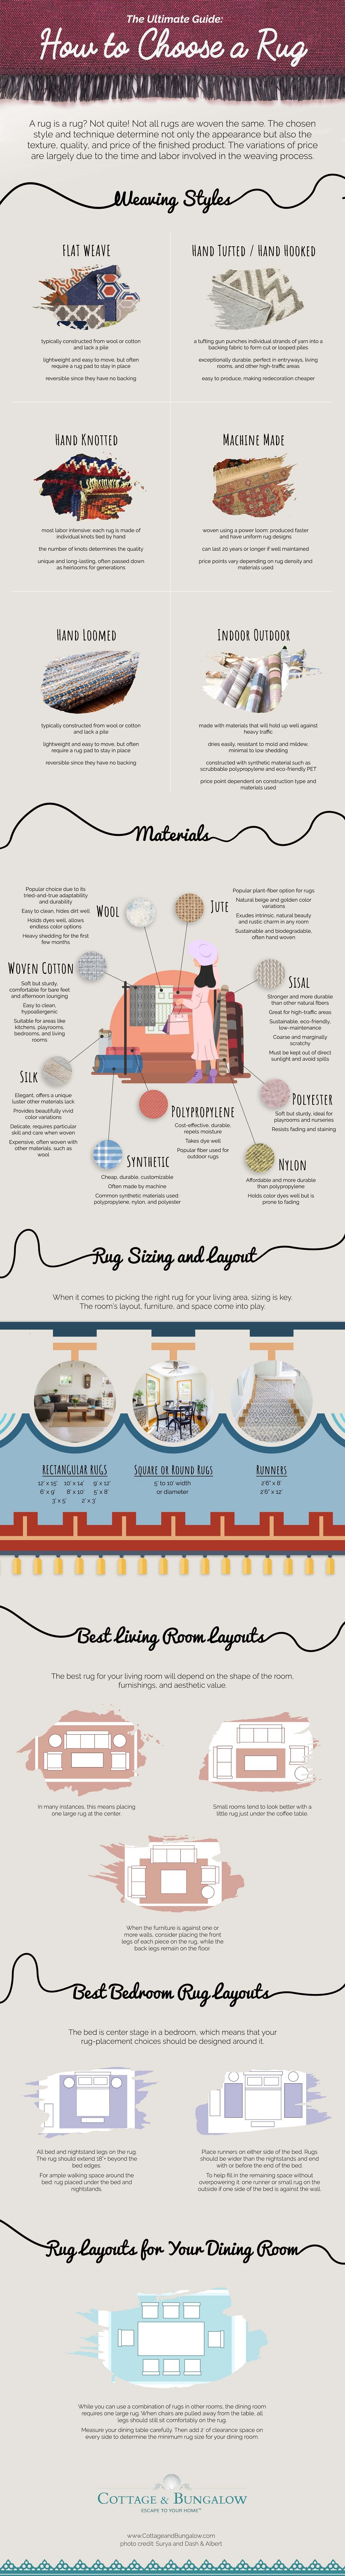 The Ultimate Guide : How to Choose a Rug #infographic